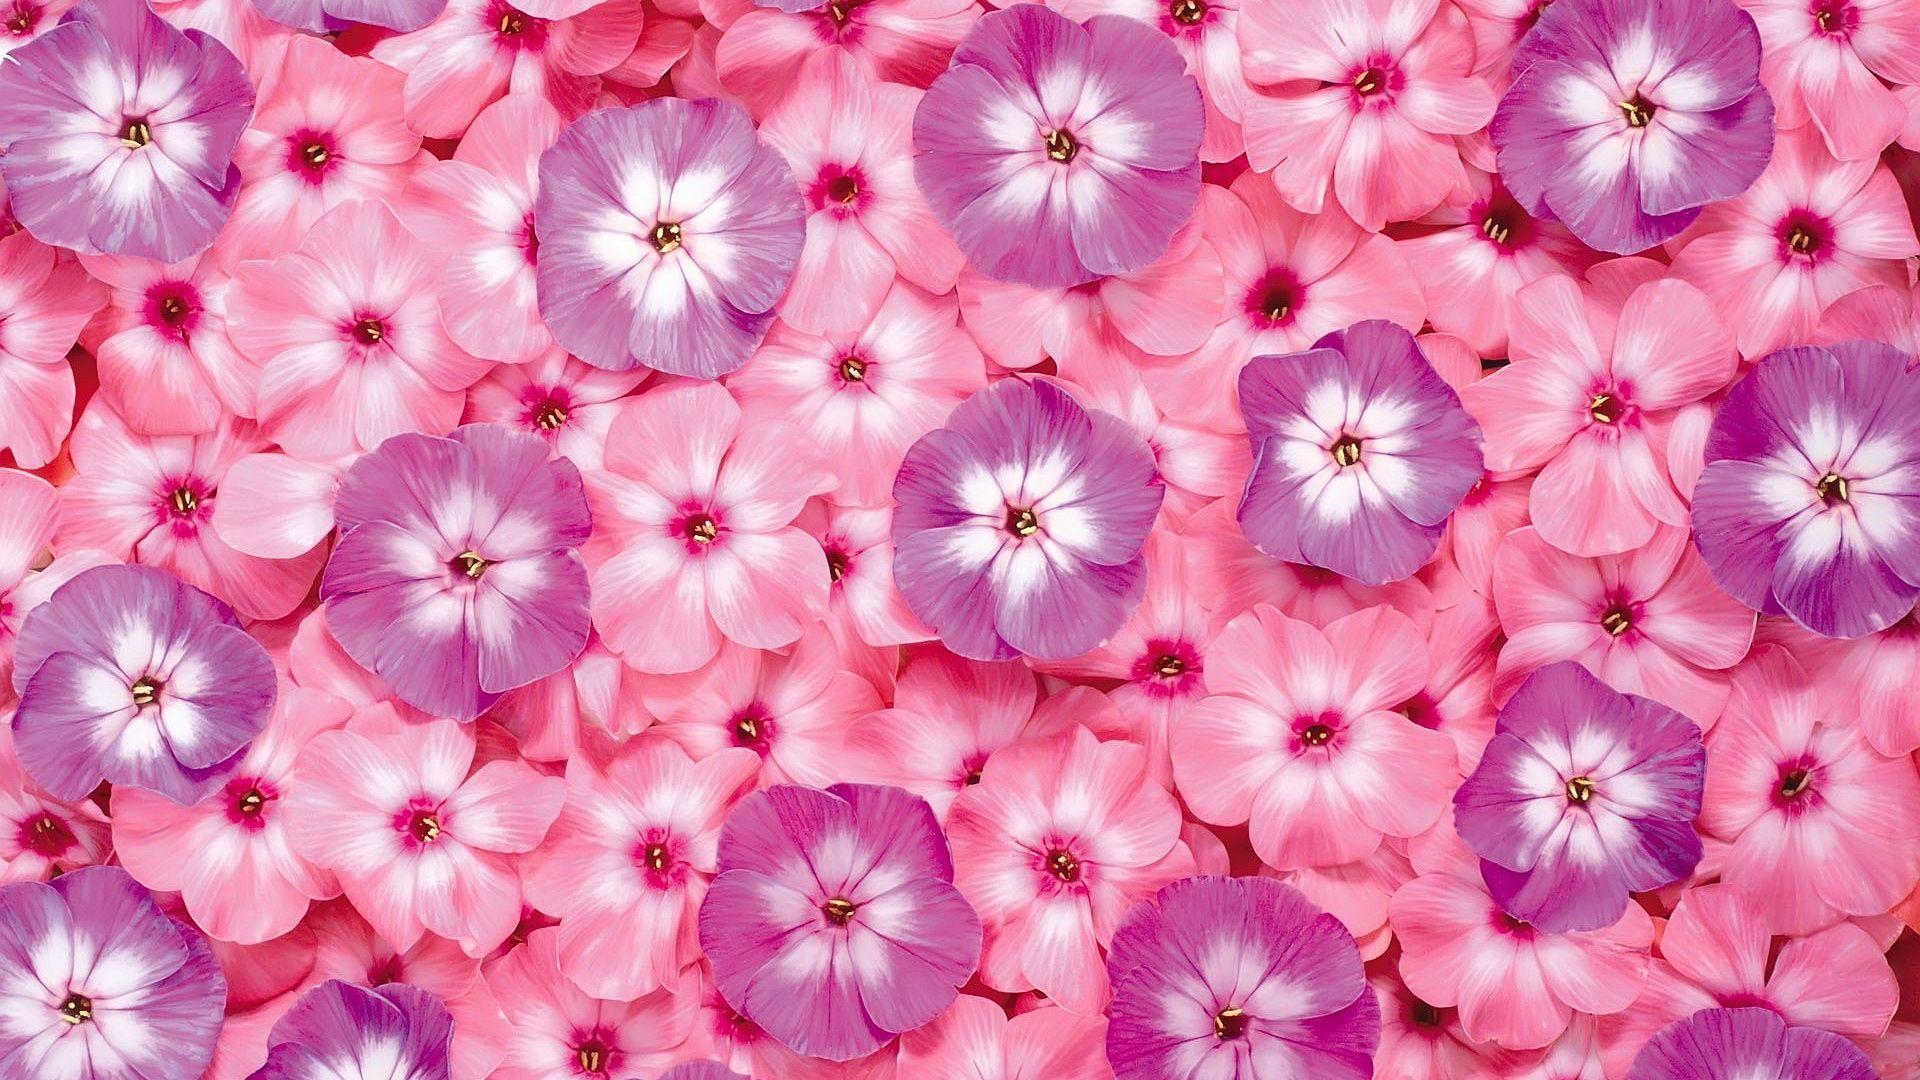 Pink Flowers Wallpaper, Full HDQ Pink Flowers Picture